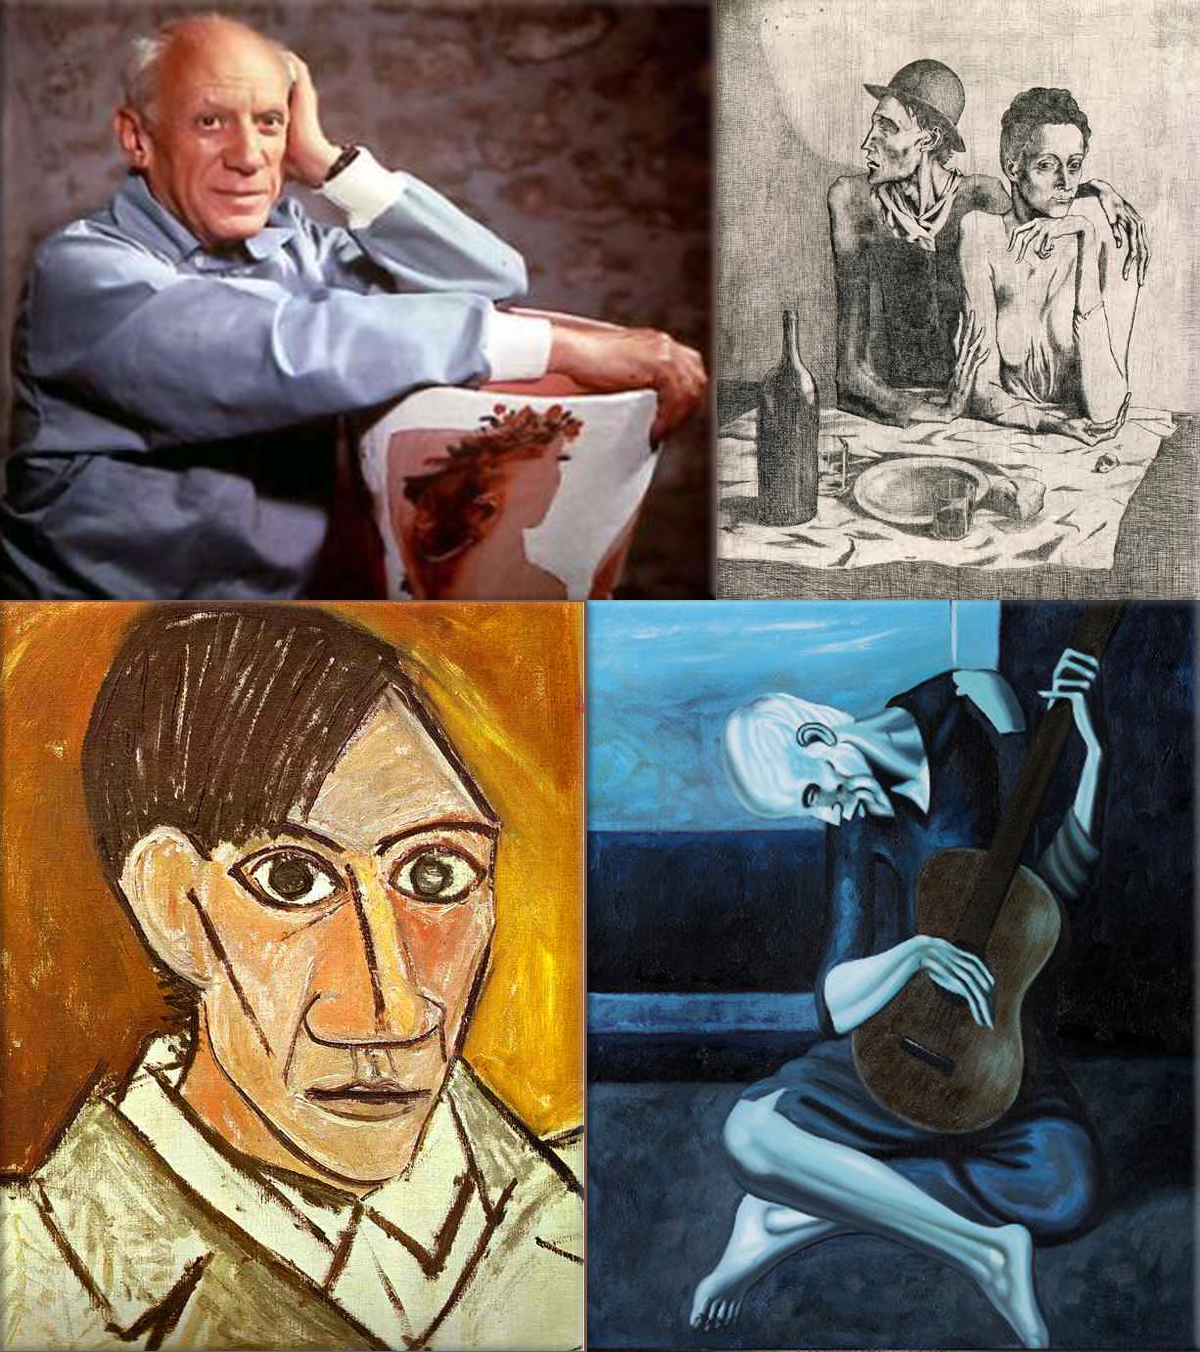 The Arts Club of Chicago hosts the opening of Pablo Picasso's first United States showing, entitled Original Drawings by Pablo Picasso, becoming an early proponent of modern art in the United States on March 20th, 1923